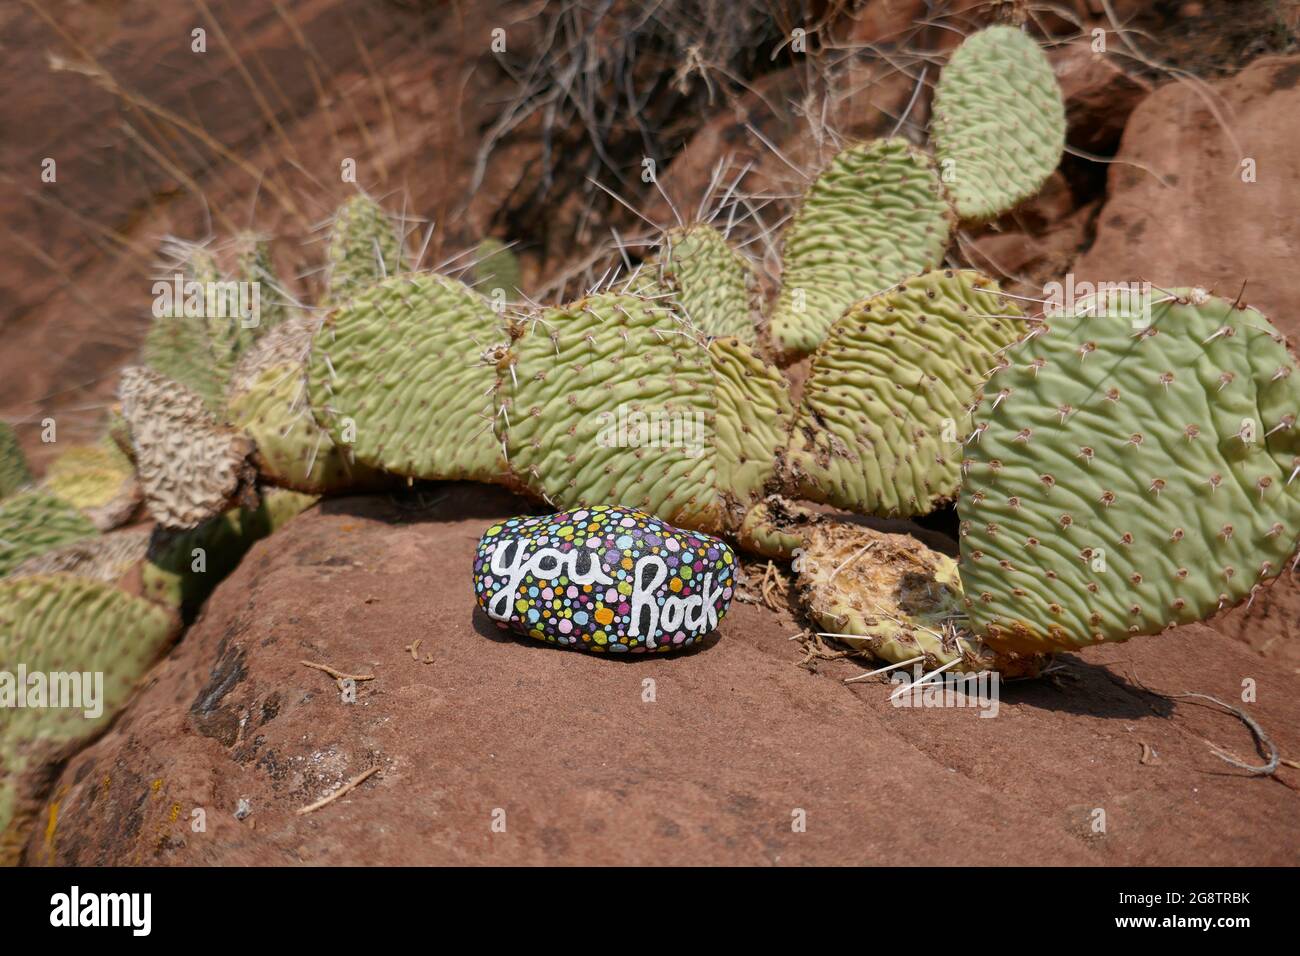 Prickly pear cactus with you rock kindness rock in front Stock Photo